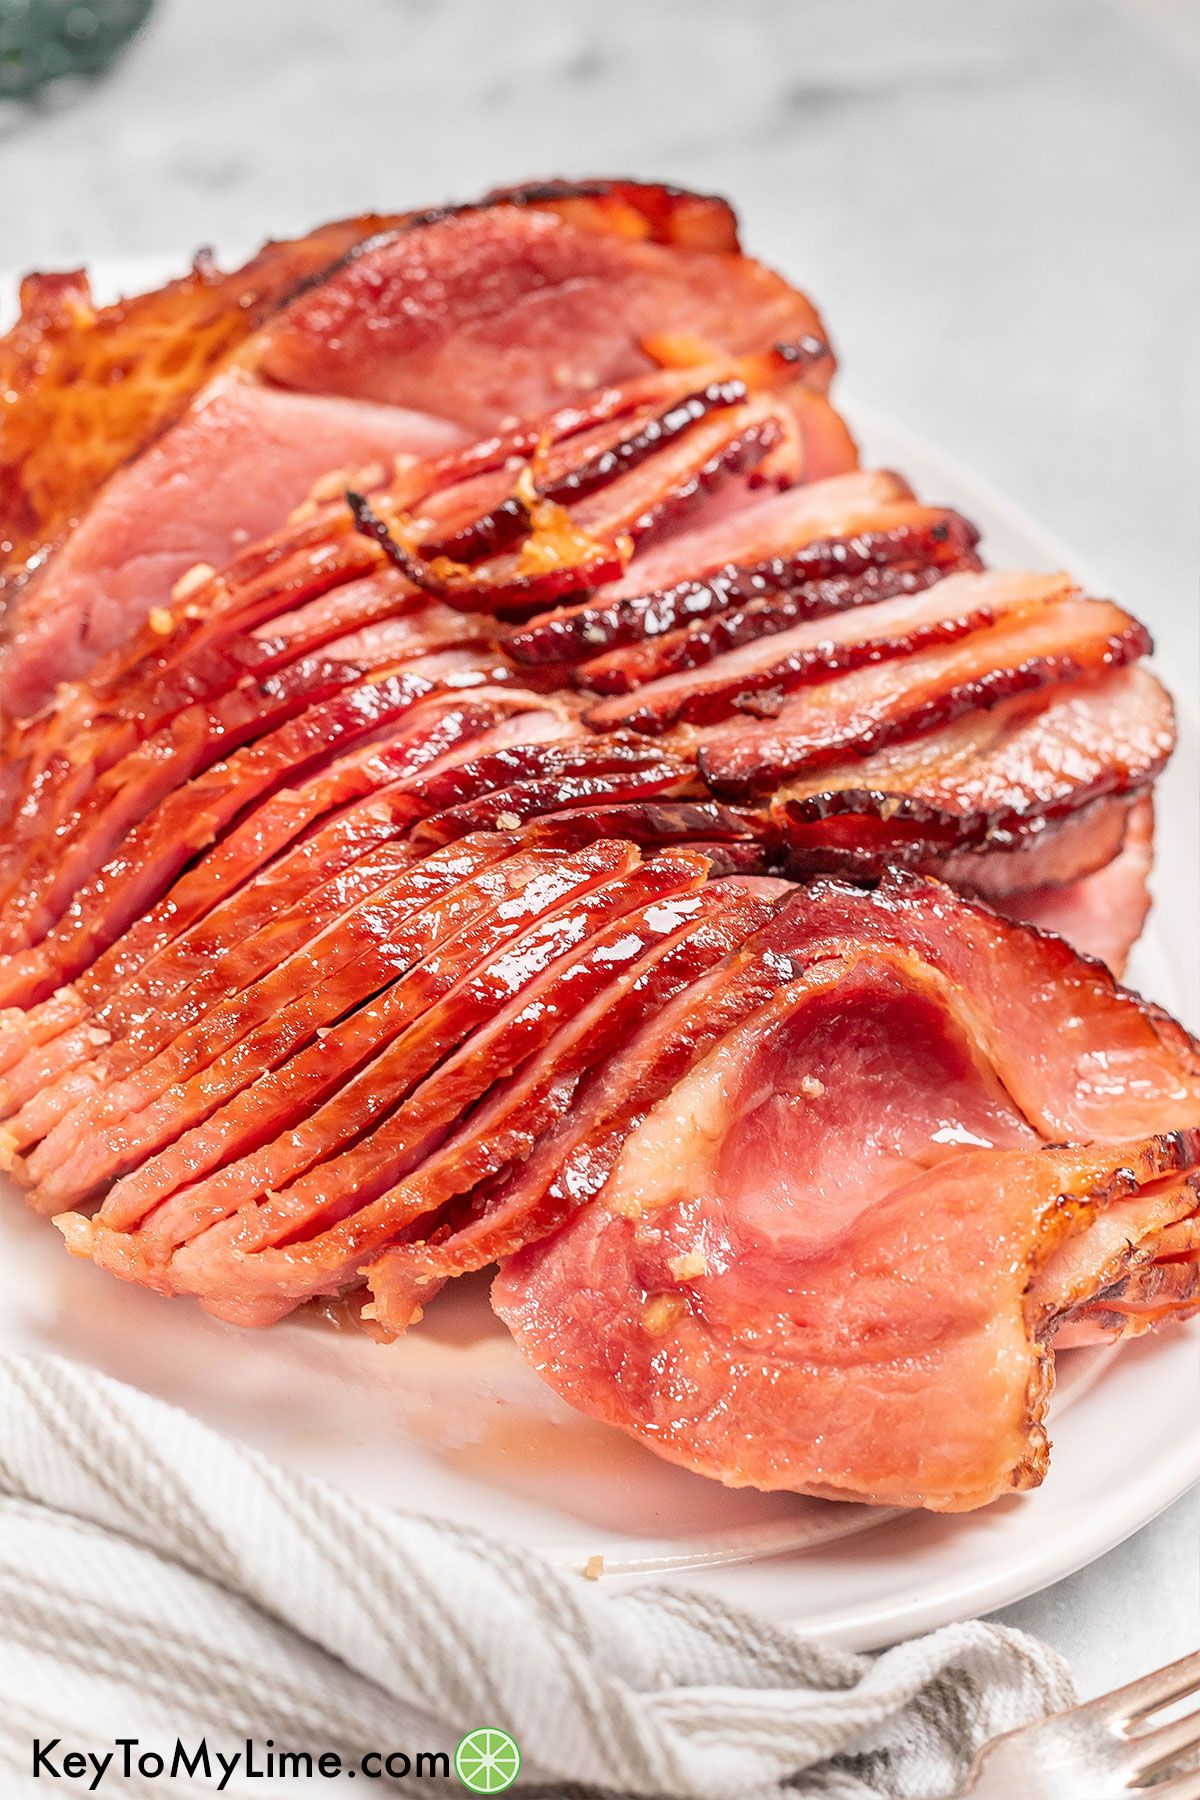 Rows of thinly sliced ham on a white dish showing the broiled crispy edges.